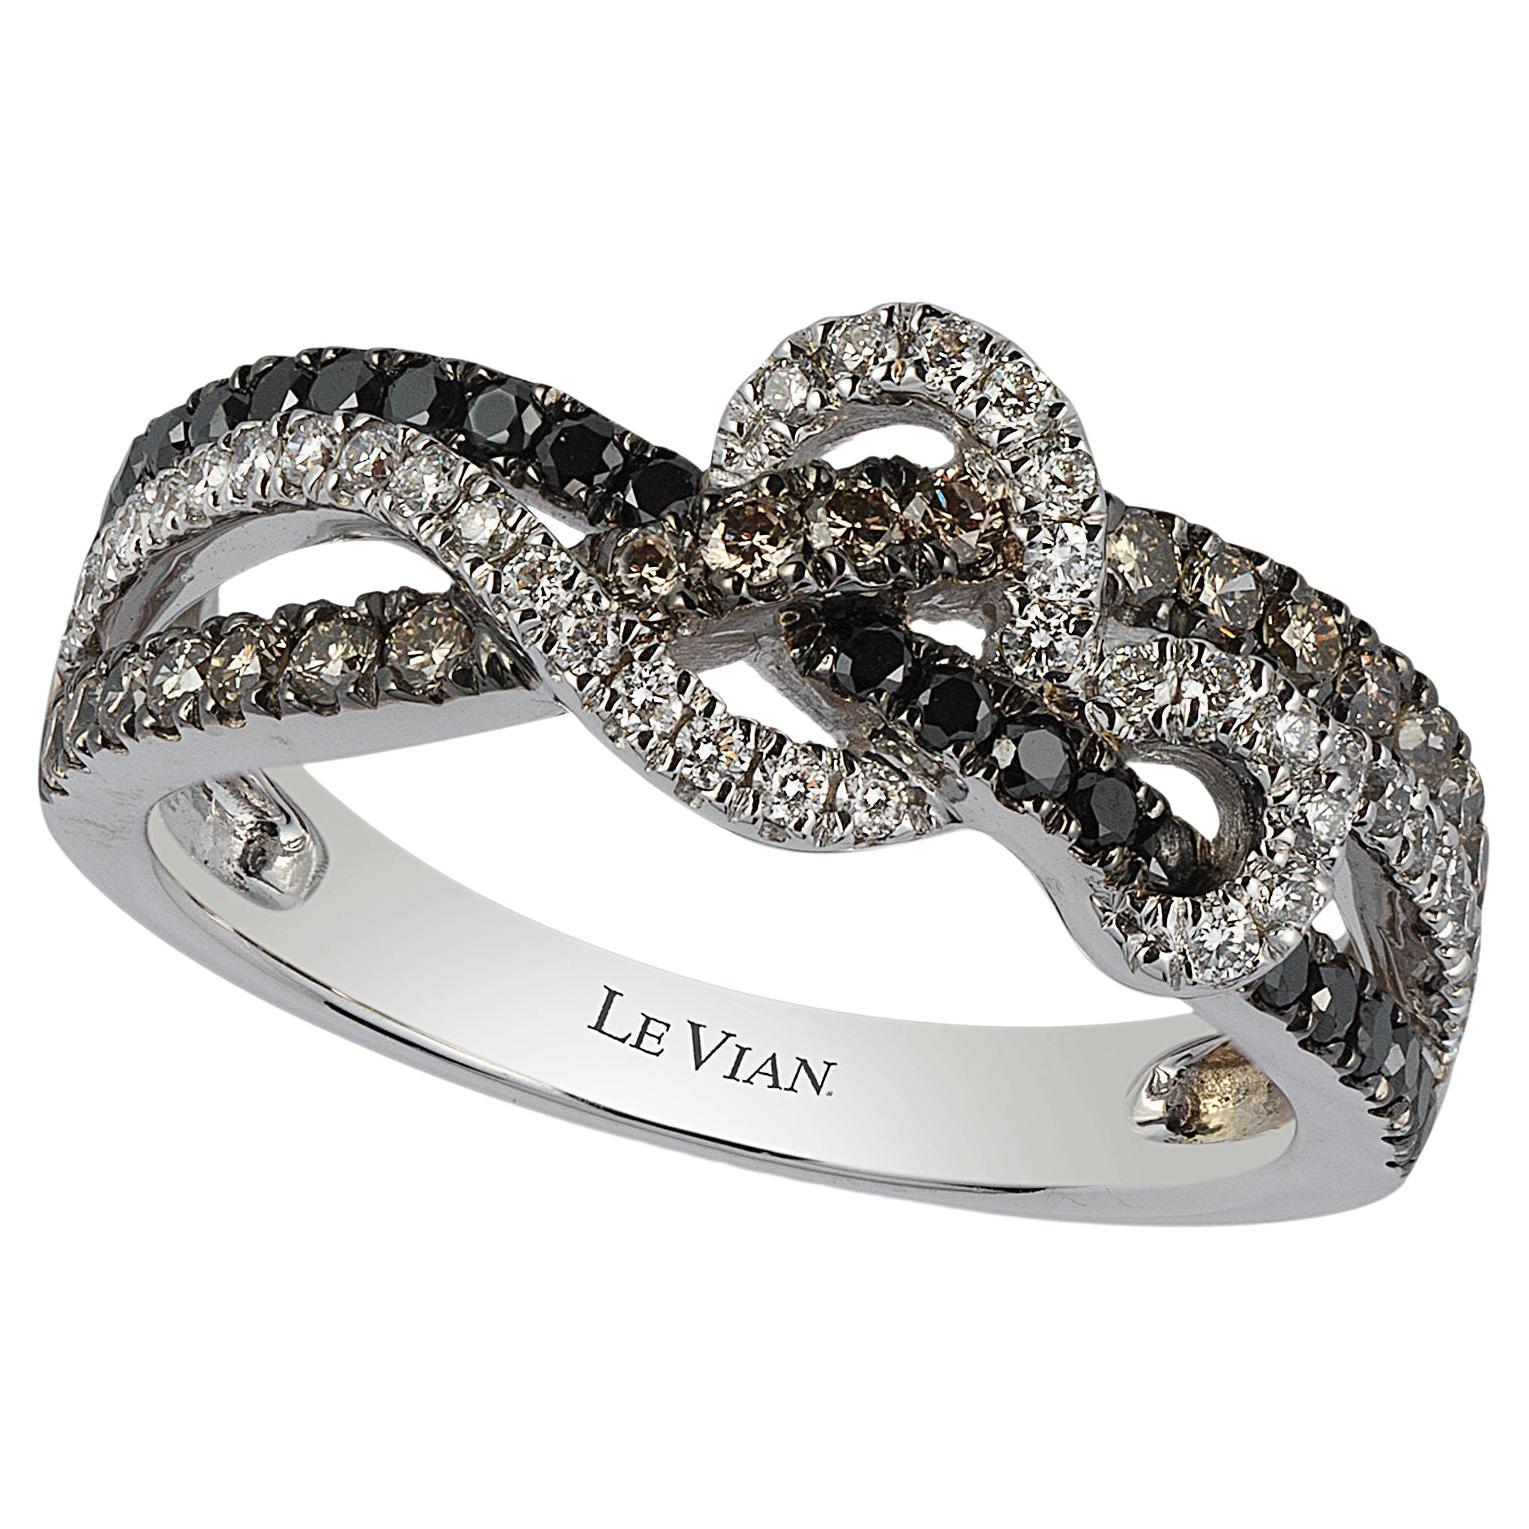 Le Vian 14K White Gold Round Black Chocolate Brown Diamonds Fancy Cocktail Ring